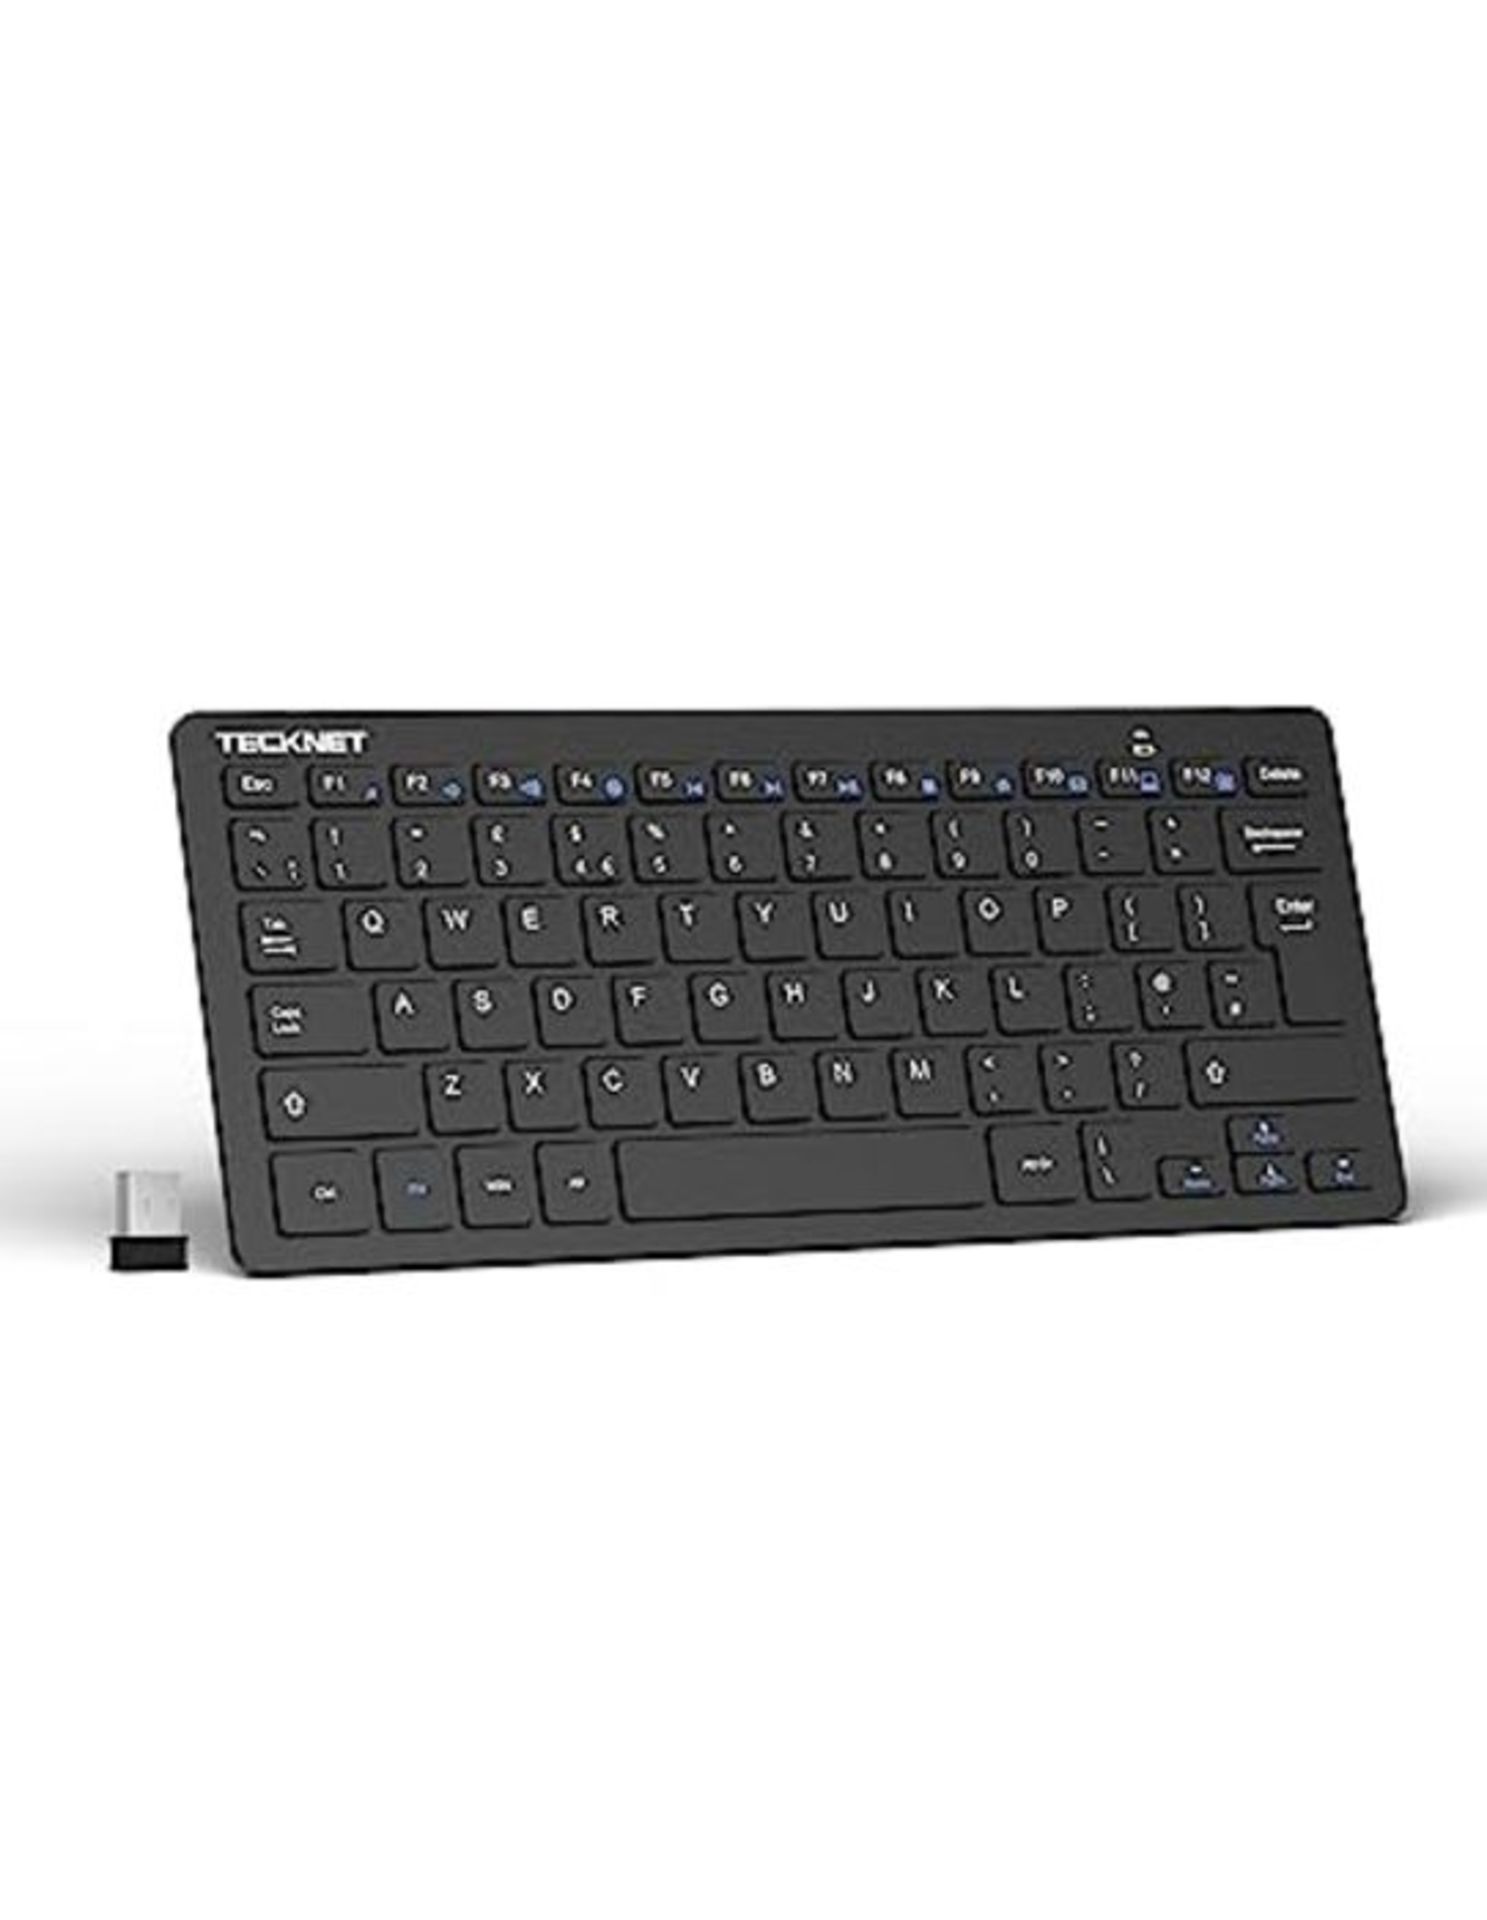 [INCOMPLETE] TECKNET 2.4G Wireless Keyboard For Windows 10/8/7/Vista/XP and Android Sm